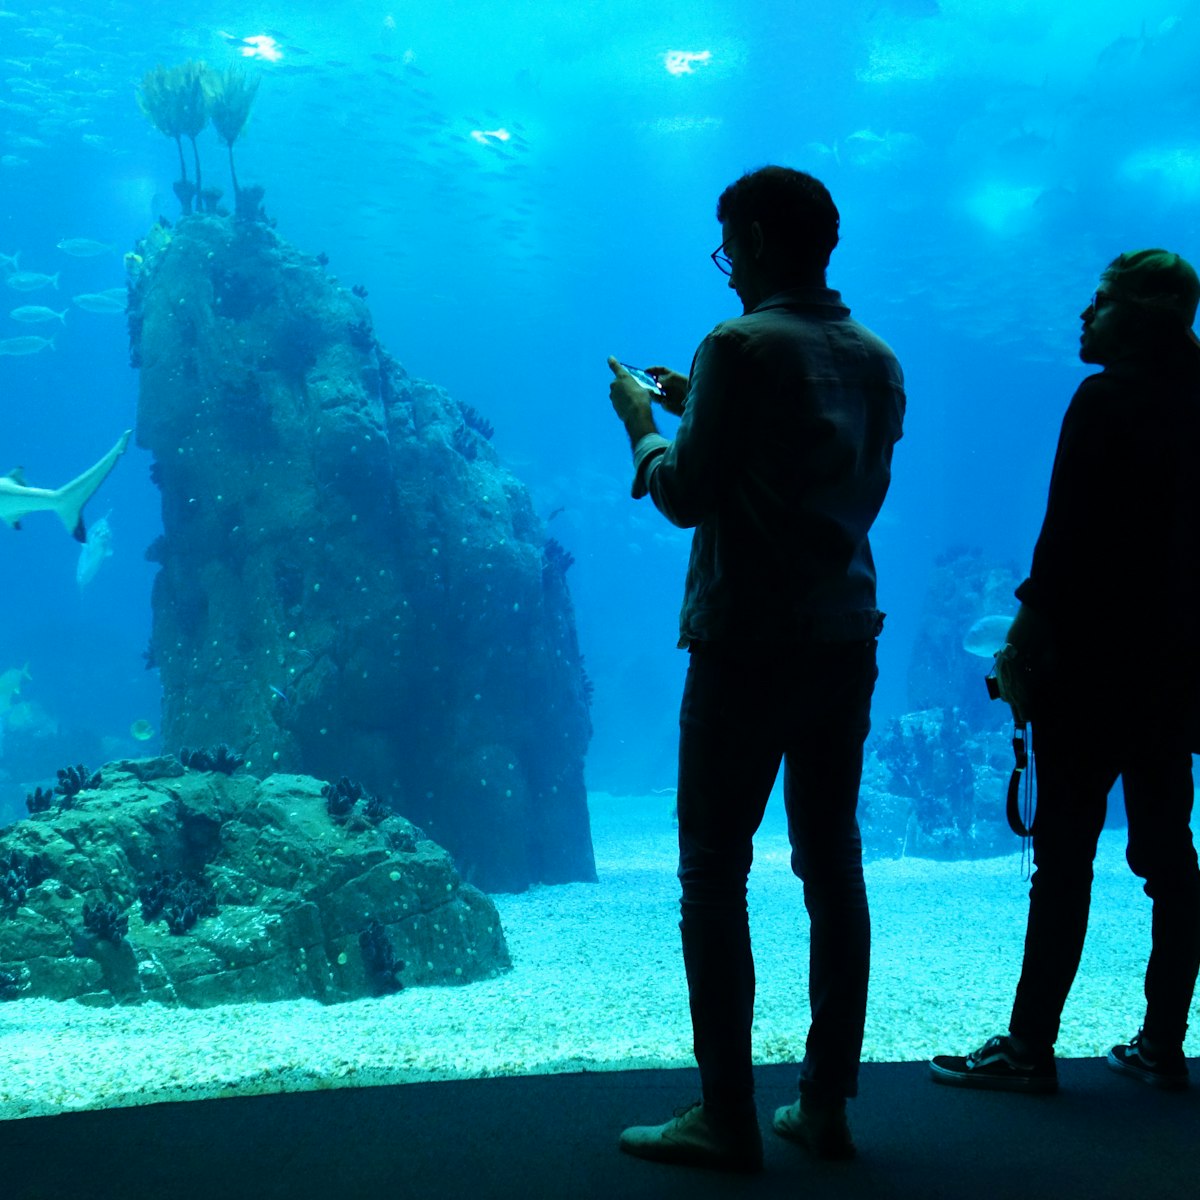 LISBON, PORTUGAL, June 20/2018: Silhouettes of visitors in the Oceanario de Lisboa.
1120362569
animal, aquarium, architecture, atlantis, background, backlighting, beautiful, beauty, blue, child, color, colorful, coral, fish, fishes, glass, image, life, lisboa, lisbon, looking, man, marine, modern, museum, nature, ocean, oceanarium, park, people, person, portugal, reef, sea, shark, silhouette, tank, tourism, travel, underwater, vacation, view, visitor, water, window, woman